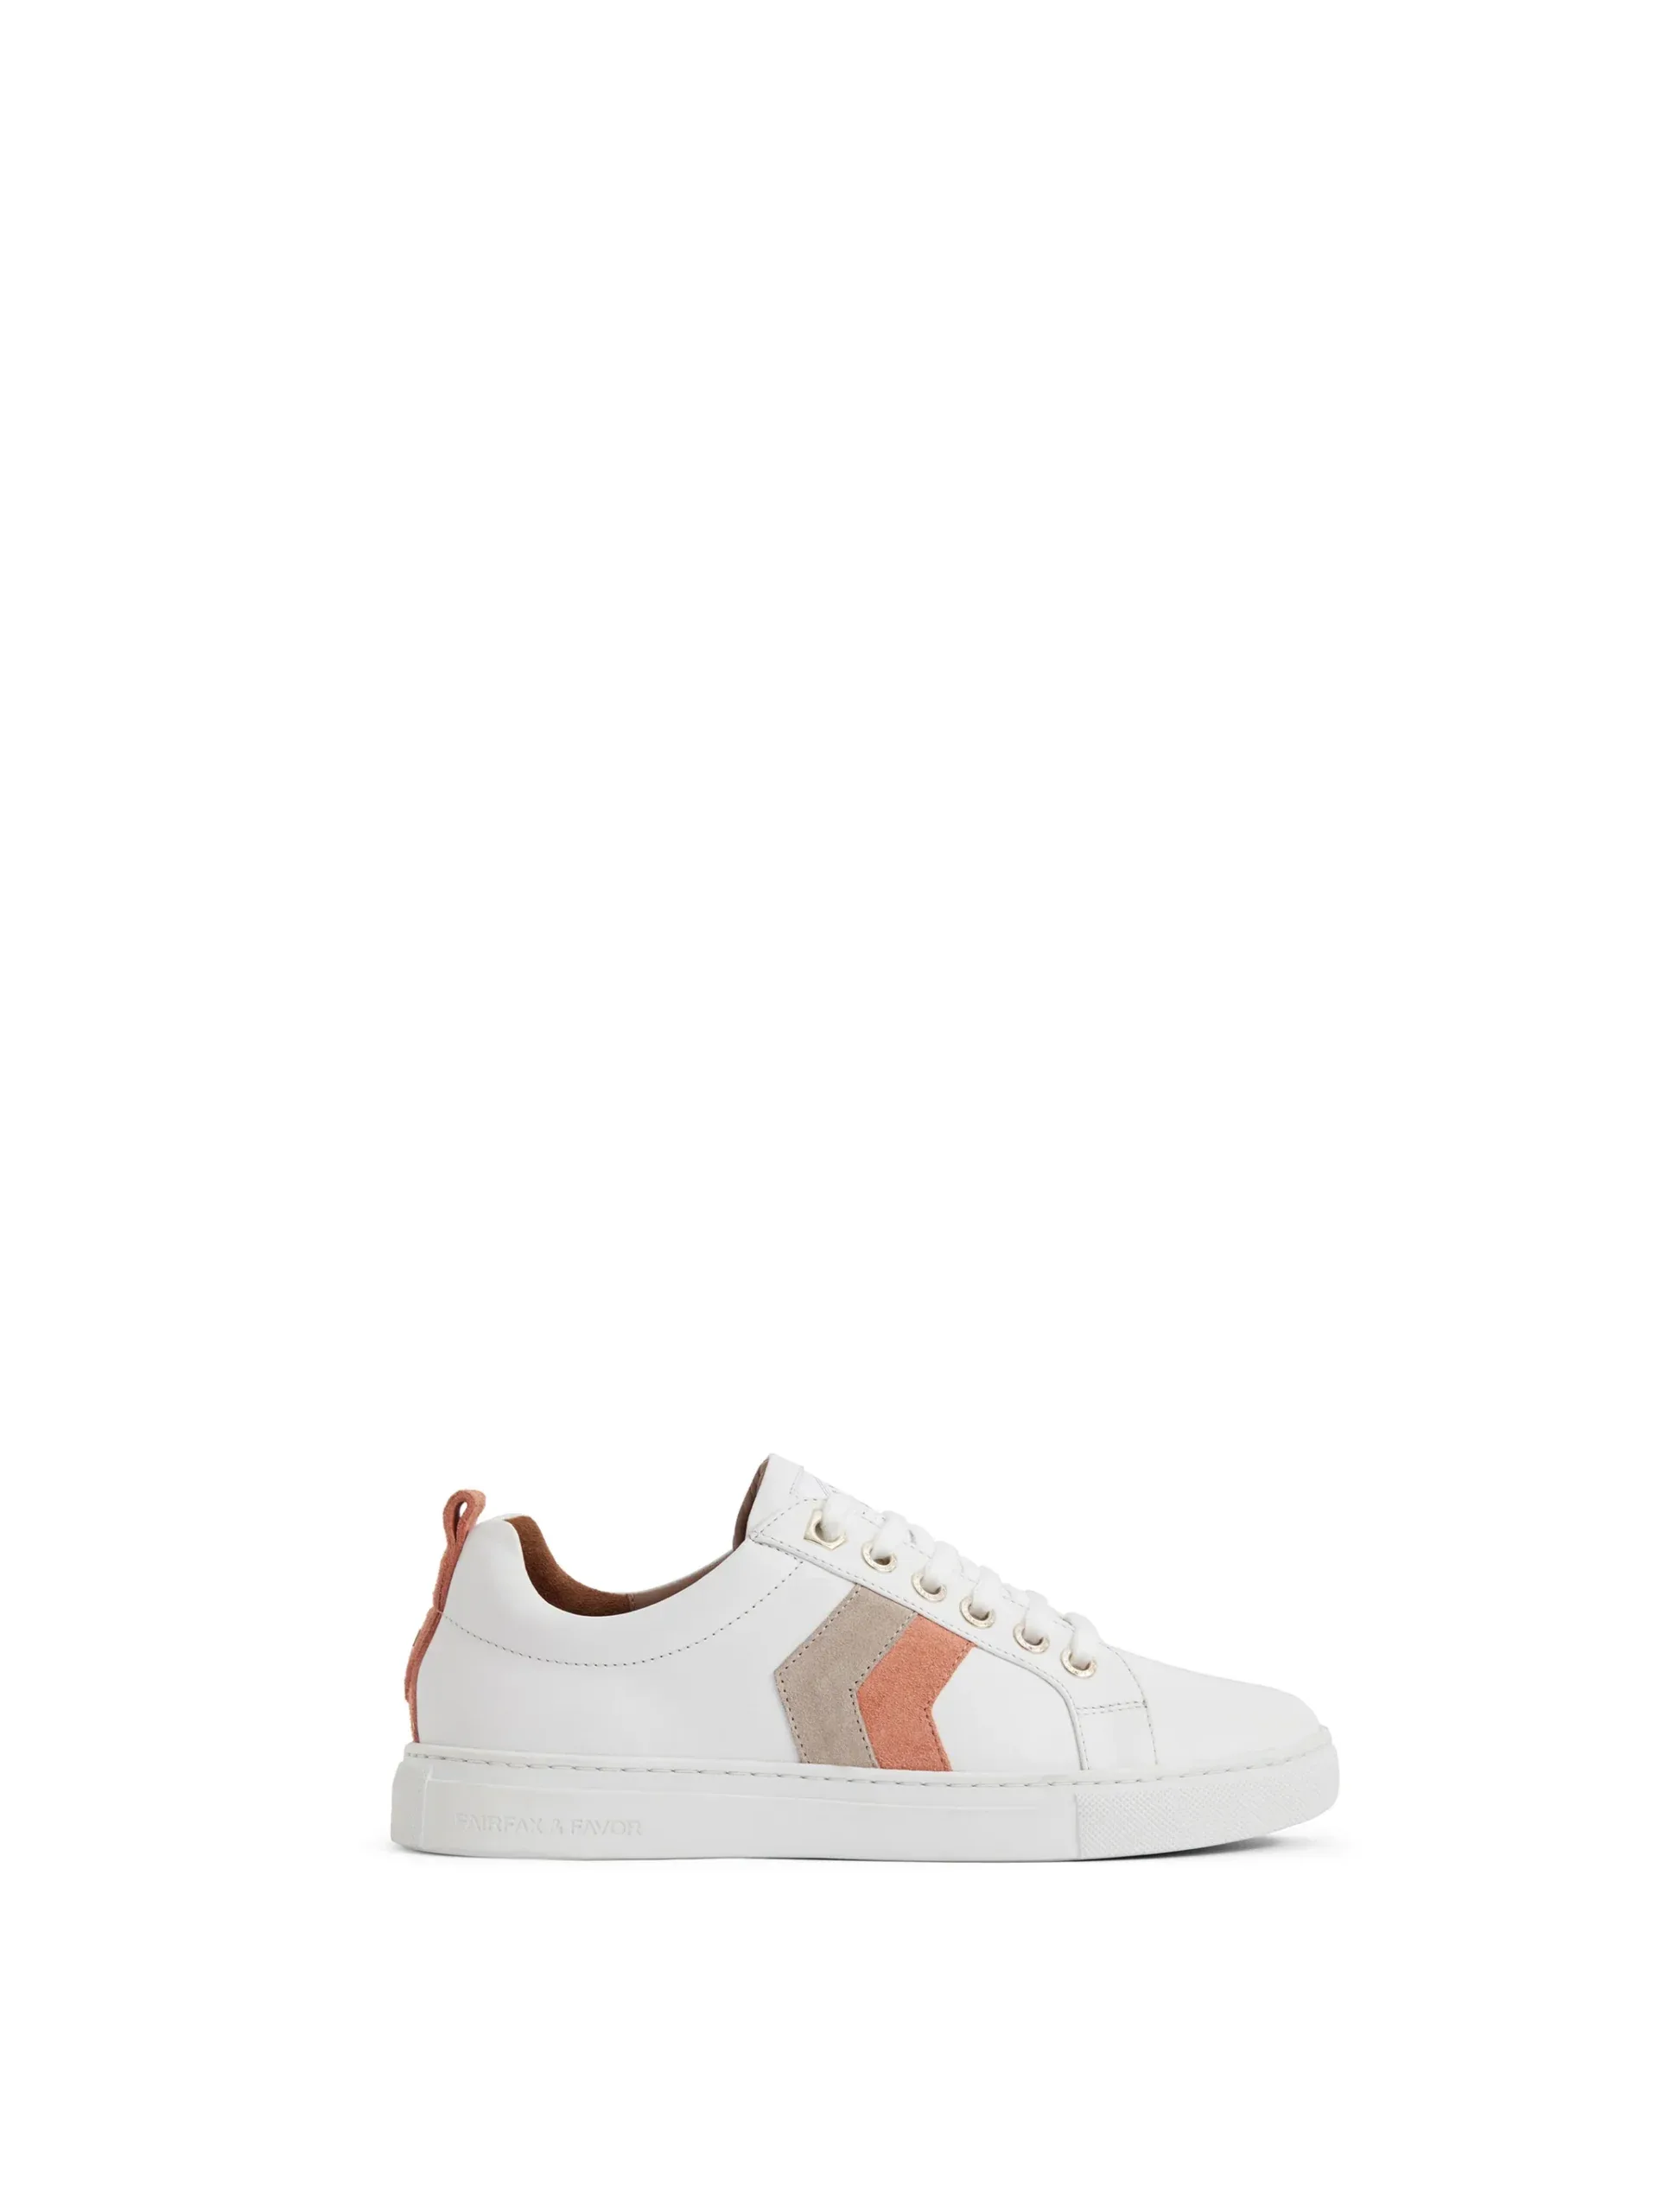 Alexandra Trainer -White Leather with Melon & Stone Suede